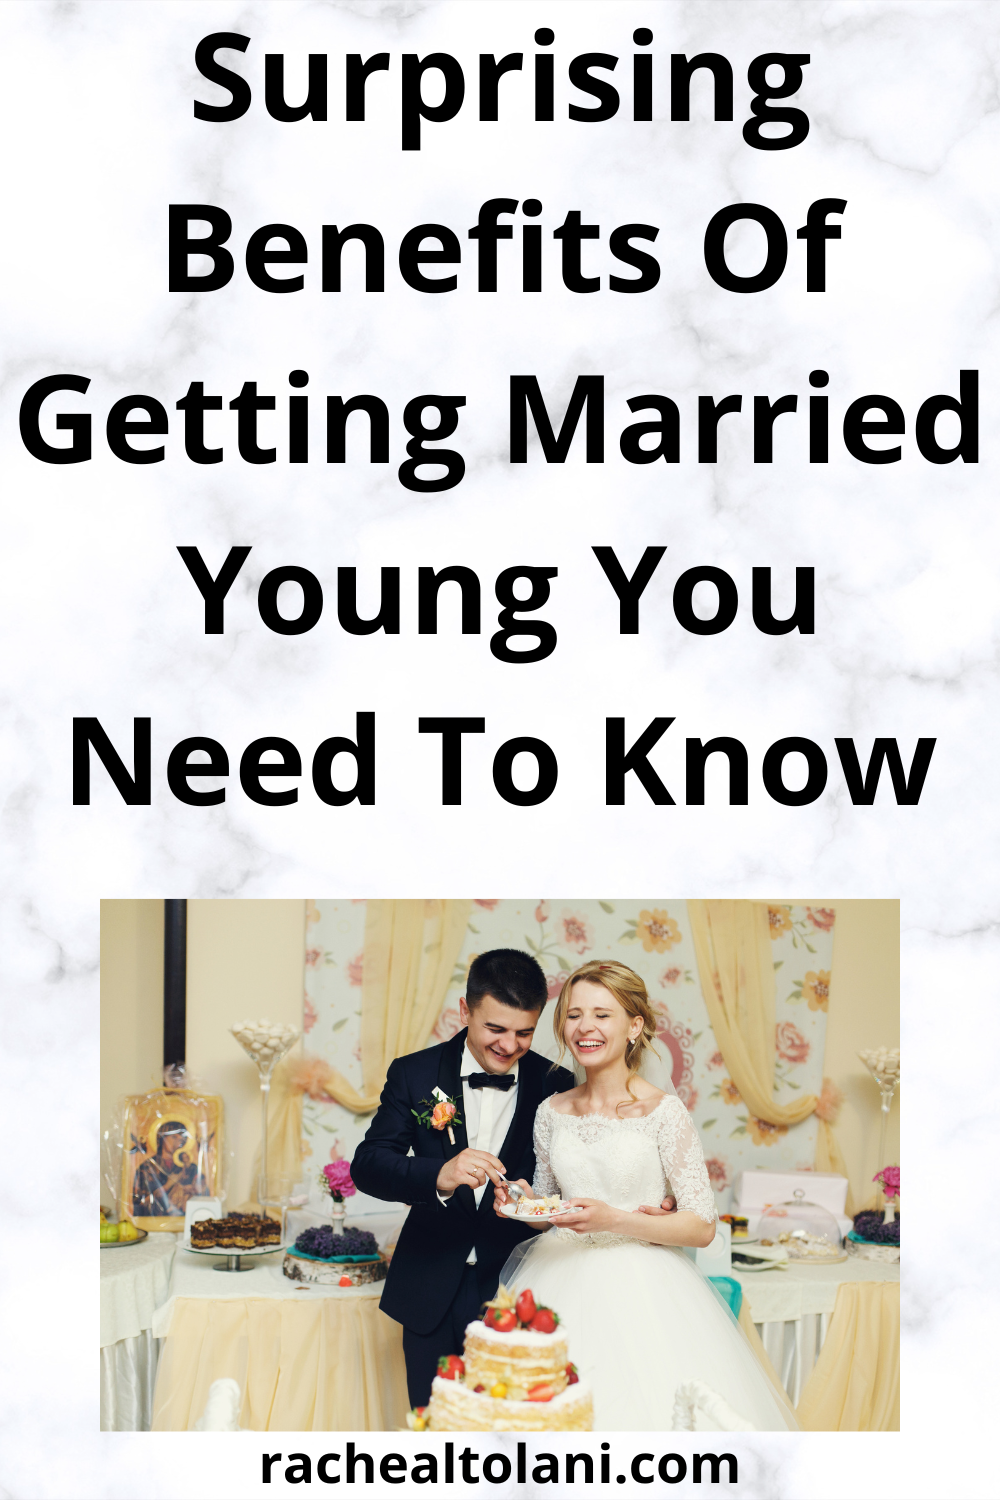 Benefits of getting married young